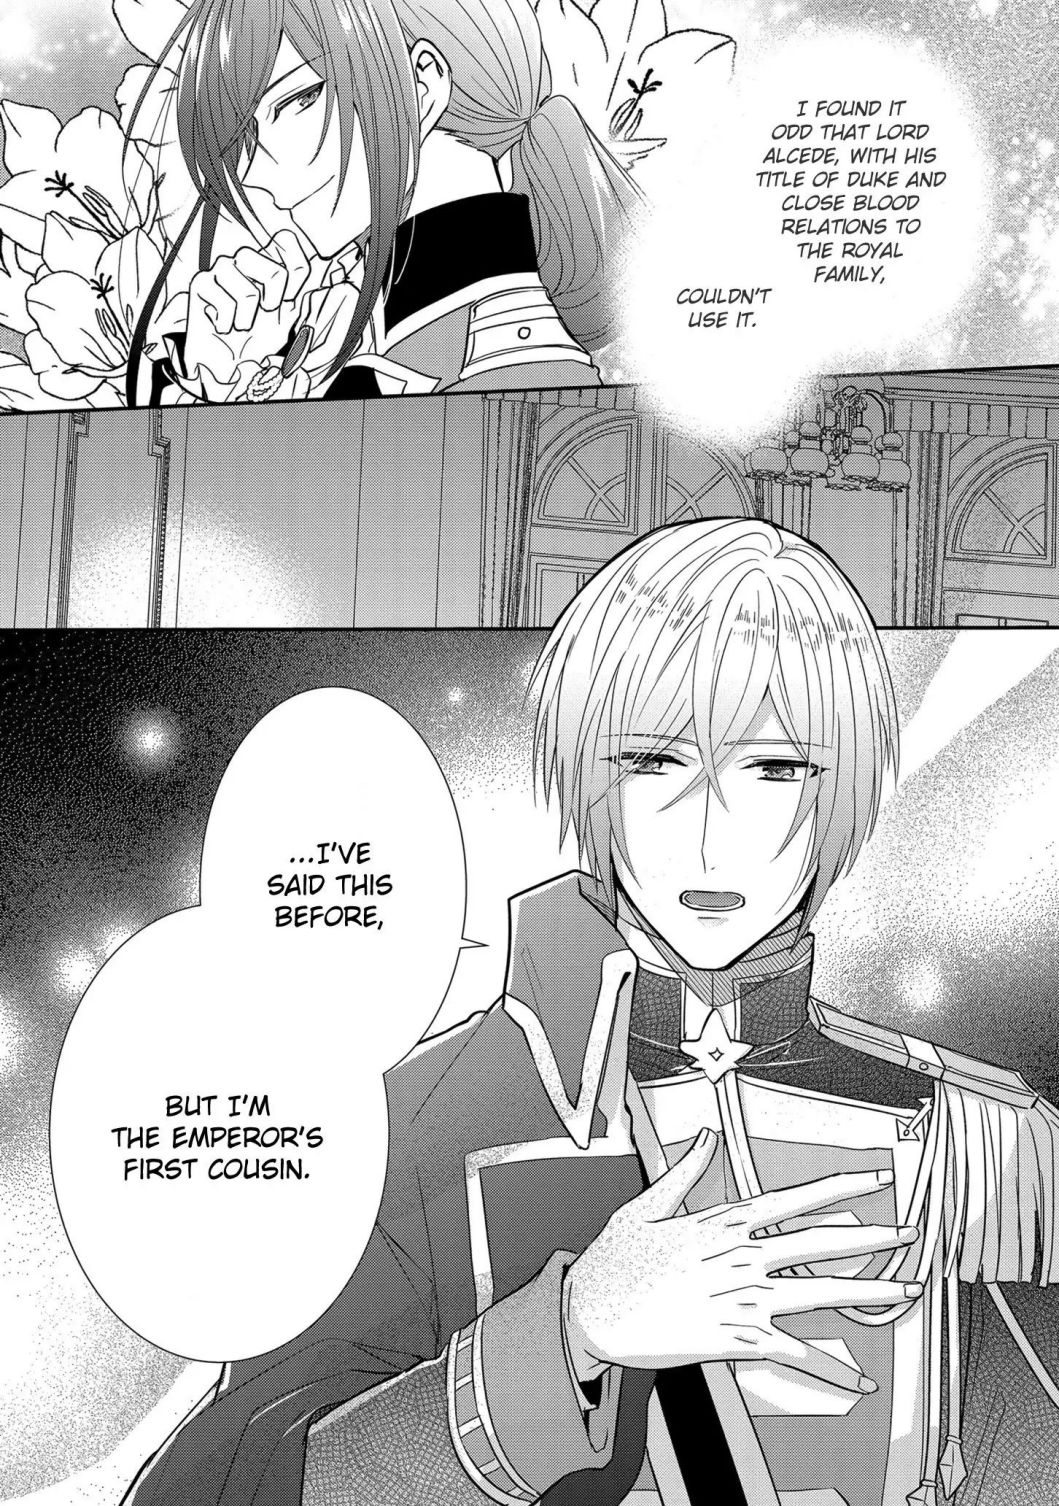 The Emperor's Court Lady is Wanted as a Bride - chapter 12.2 - #2